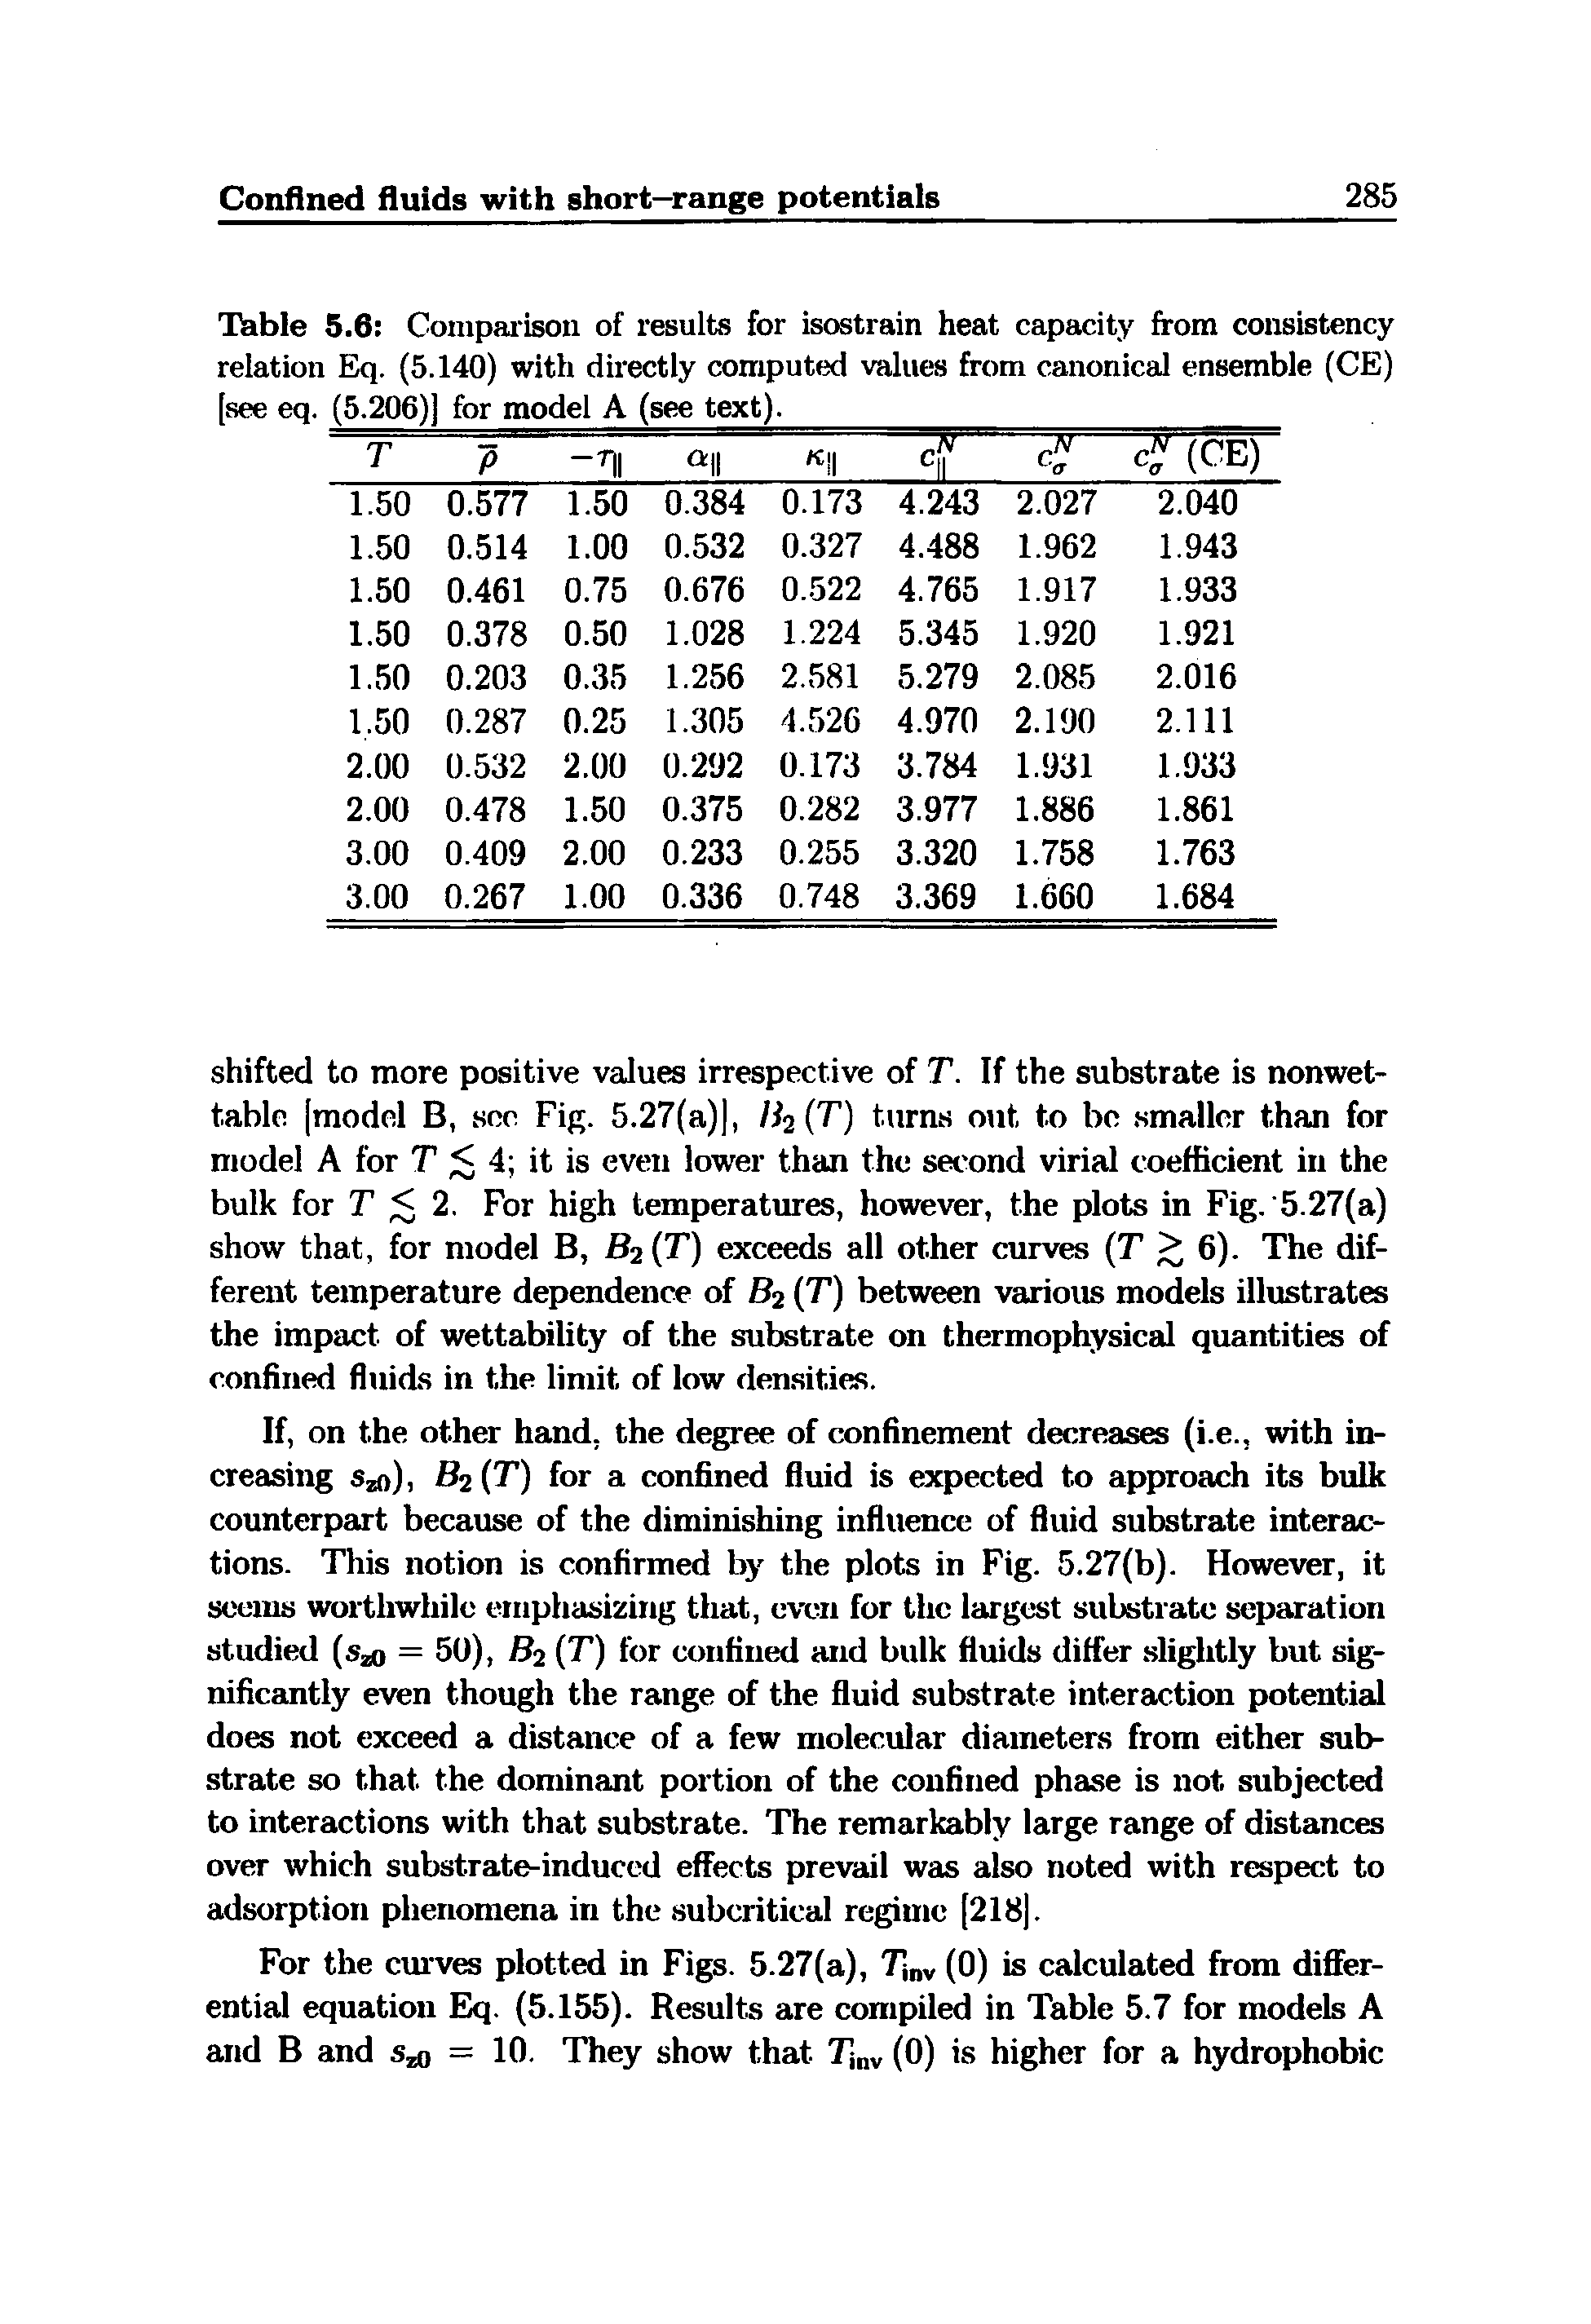 Table 5.6 Compaiison of results for isostrain heat capacity from consistency relation Eq. (5.140) with directly computed values from canonical ensemble (CE) [see eq. (5.206)] for model A (see text). ...